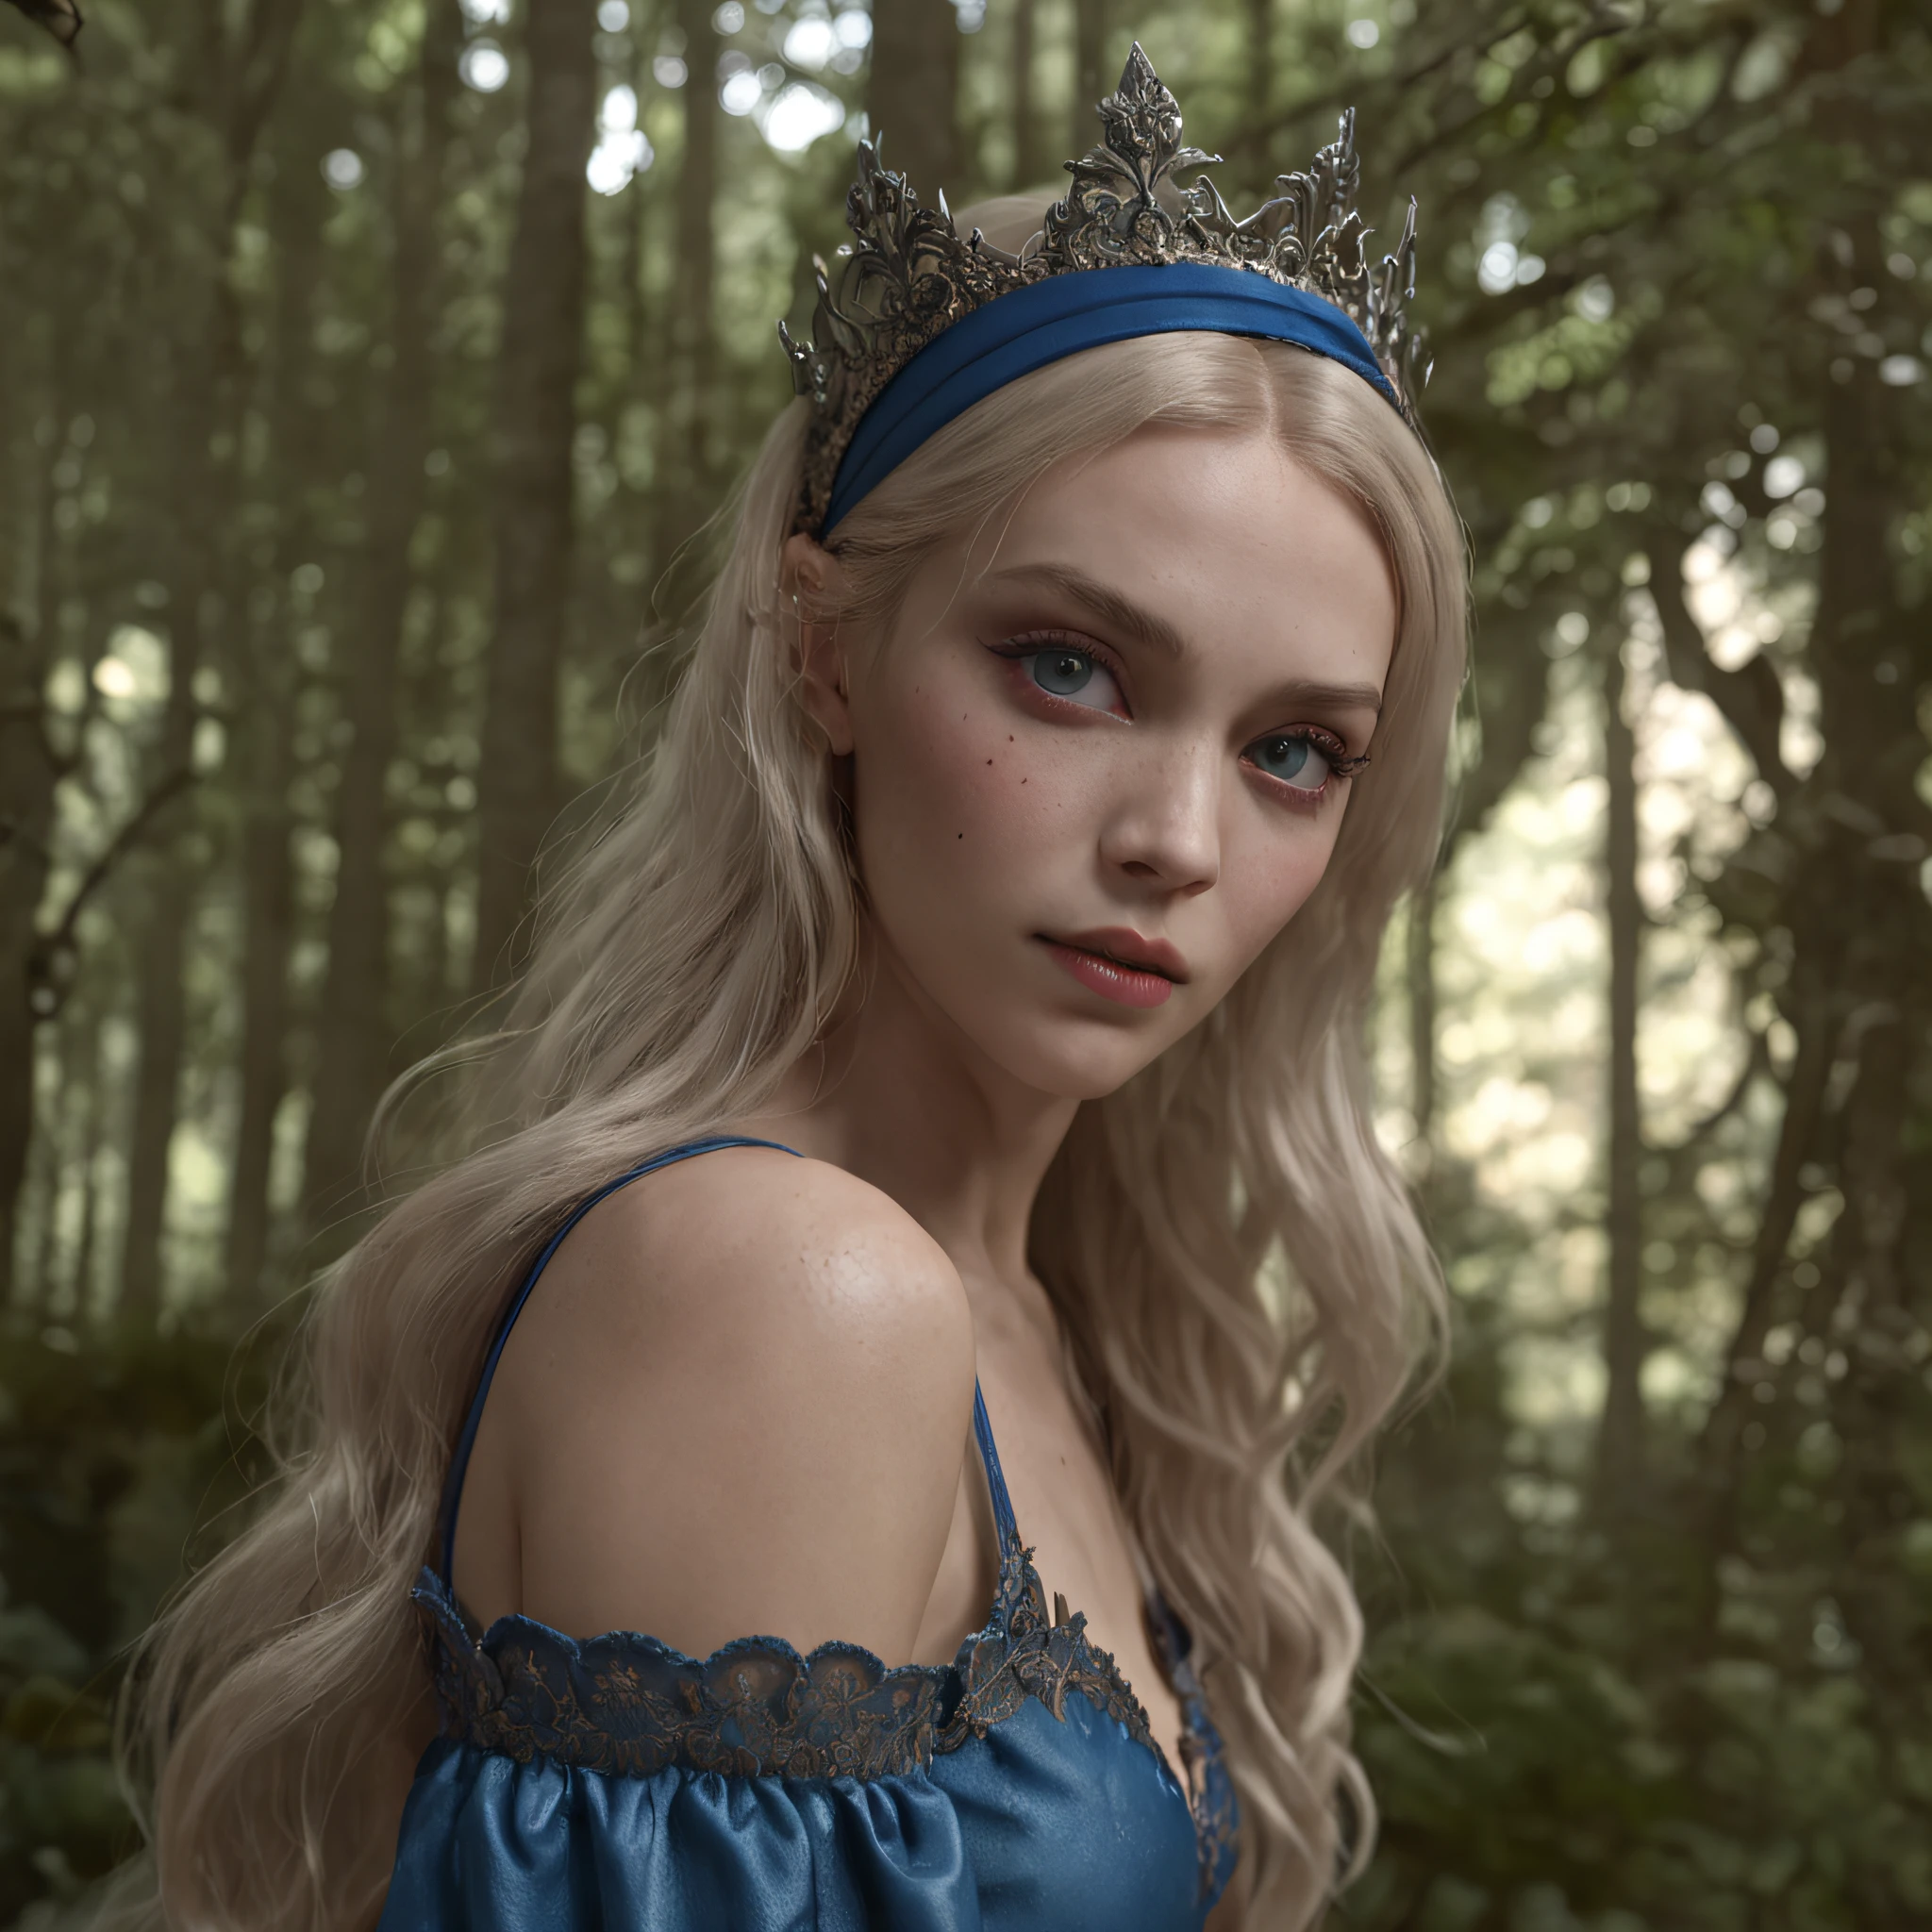 (professional 3d render:1.3) af (Realistic:1.3) most beautiful artwork photo in the world，Features soft and shiny female, ((Epic fantasy Alice in Wonderland, strong powerful female look,  long blonde hair, piercing eyes and determined expression in dynamic pose, Fantastic location, Majestic dark spooky forest)), full body 8k unity render, action  shot, skin pore, very dark lighting, heavy shading, Detailed, Detailed face, (vibrant, photograph realistic, Realistic, Dramatic, Dark, Sharp focus, 8K), (Blue dress in style of Alice slightly damaged and worn:1.4), ((((blue headband)))), (Intricate:1.4), decadent, (Highly detailed:1.4), Digital painting, rendering by octane, art  stations, concept-art, smooth, Sharp focus, illustration, Art germ, (loish:0.23), wlop ilya kuvshinov, and greg rutkowski and alphonse mucha gracias and Tim Burton, (Global illumination, Studio light, volumettic light), heavy rain, particles floating, lotr, fantasy, elf, full bodyesbian, ((Dark and spooky forest background:1.3)),CGSesociety, art  stations